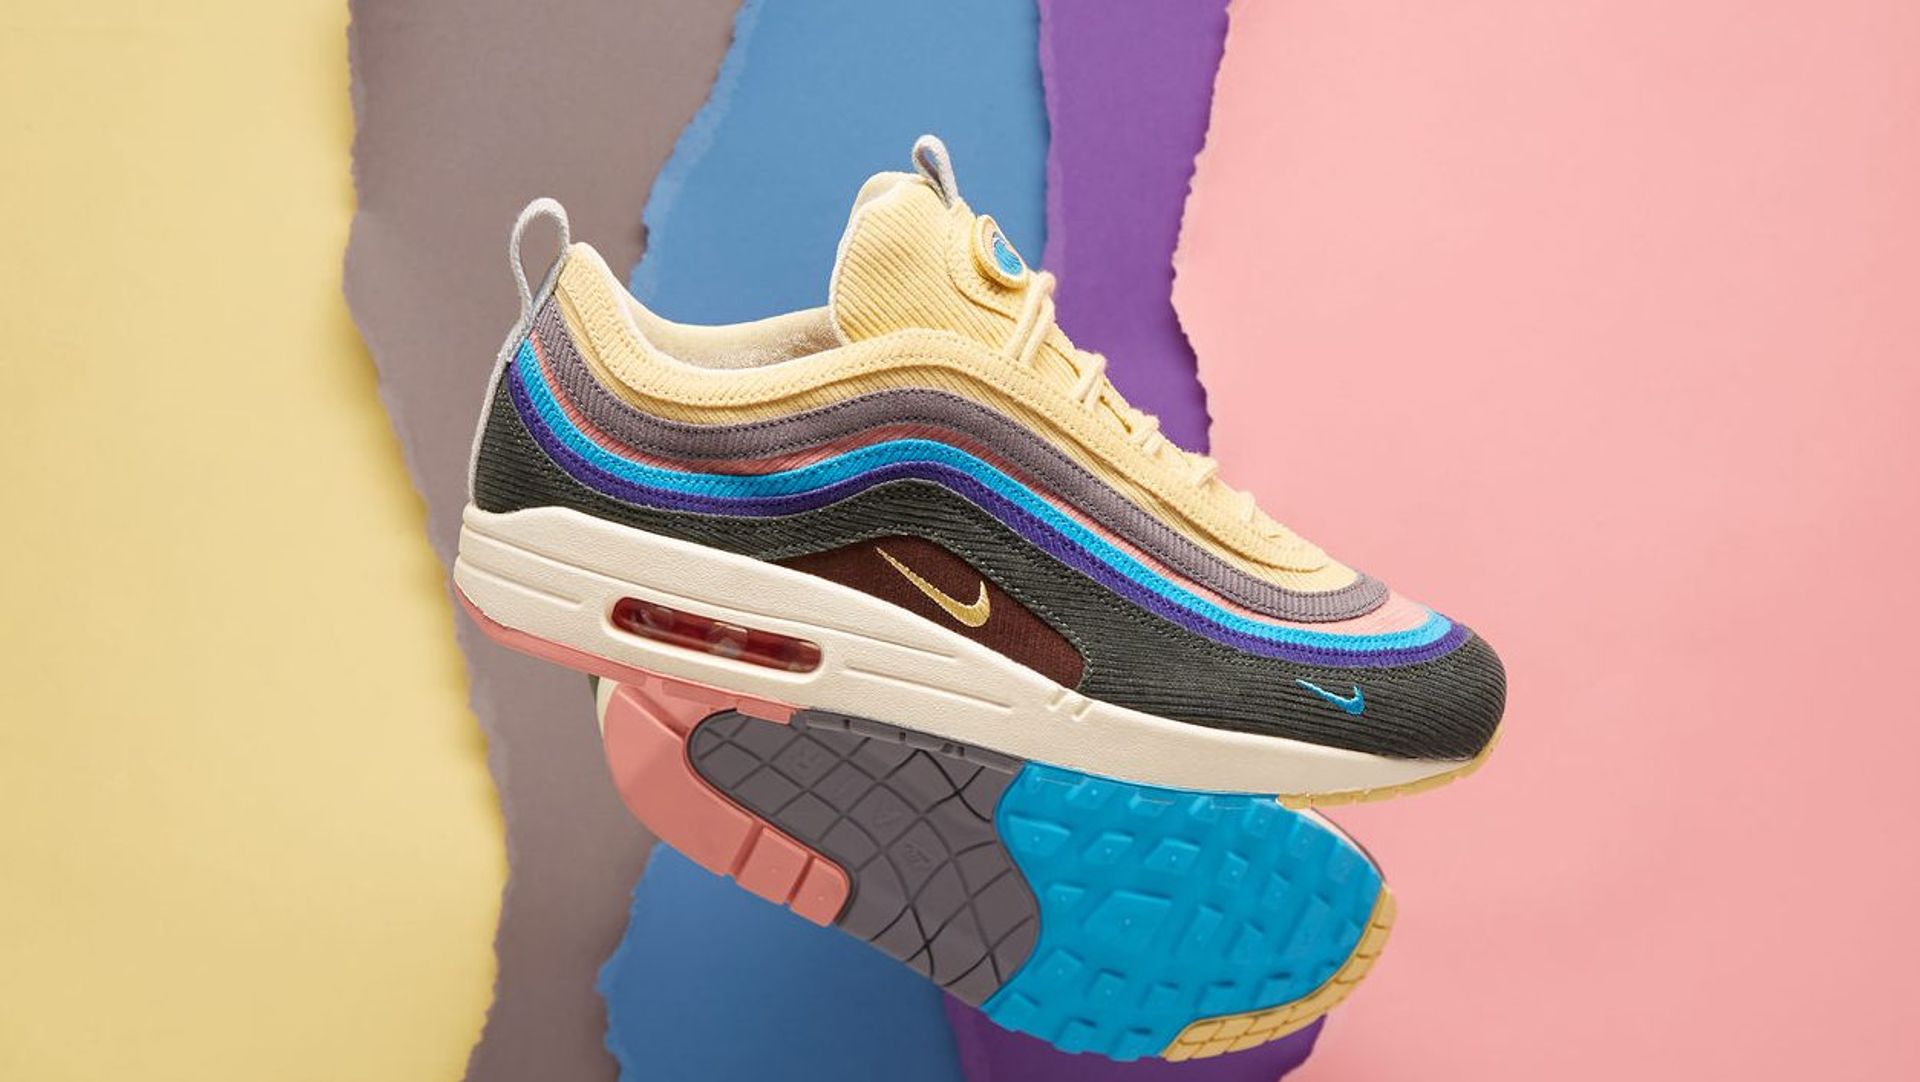 nike air max day 2018 sean wotherspoon 1 97